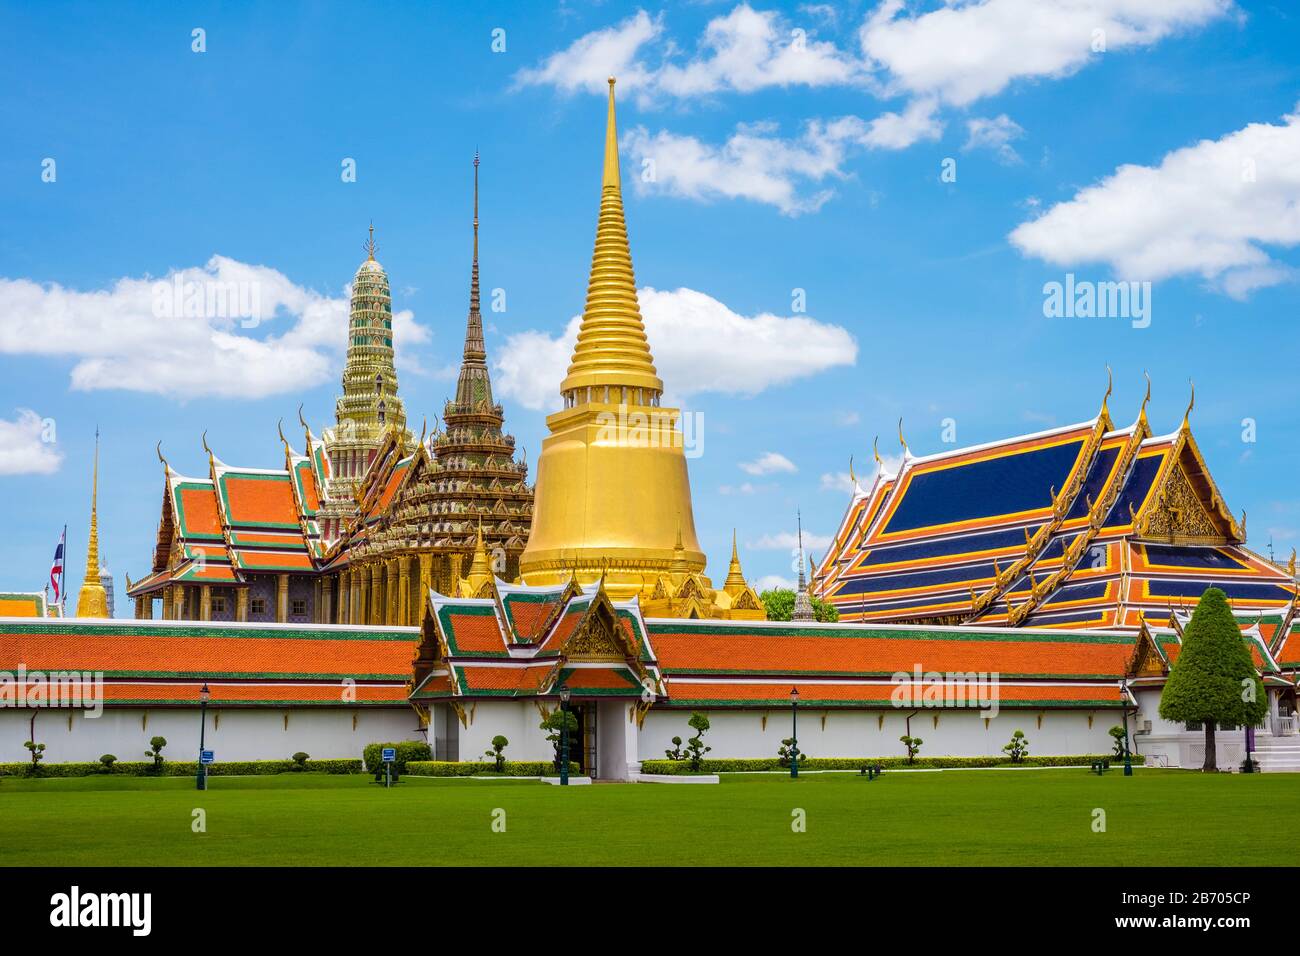 Spires and stupas of Temple of the Emerald Buddha (Wat Phra Kaew), Grand Palace complex, Bangkok, Thailand Stock Photo